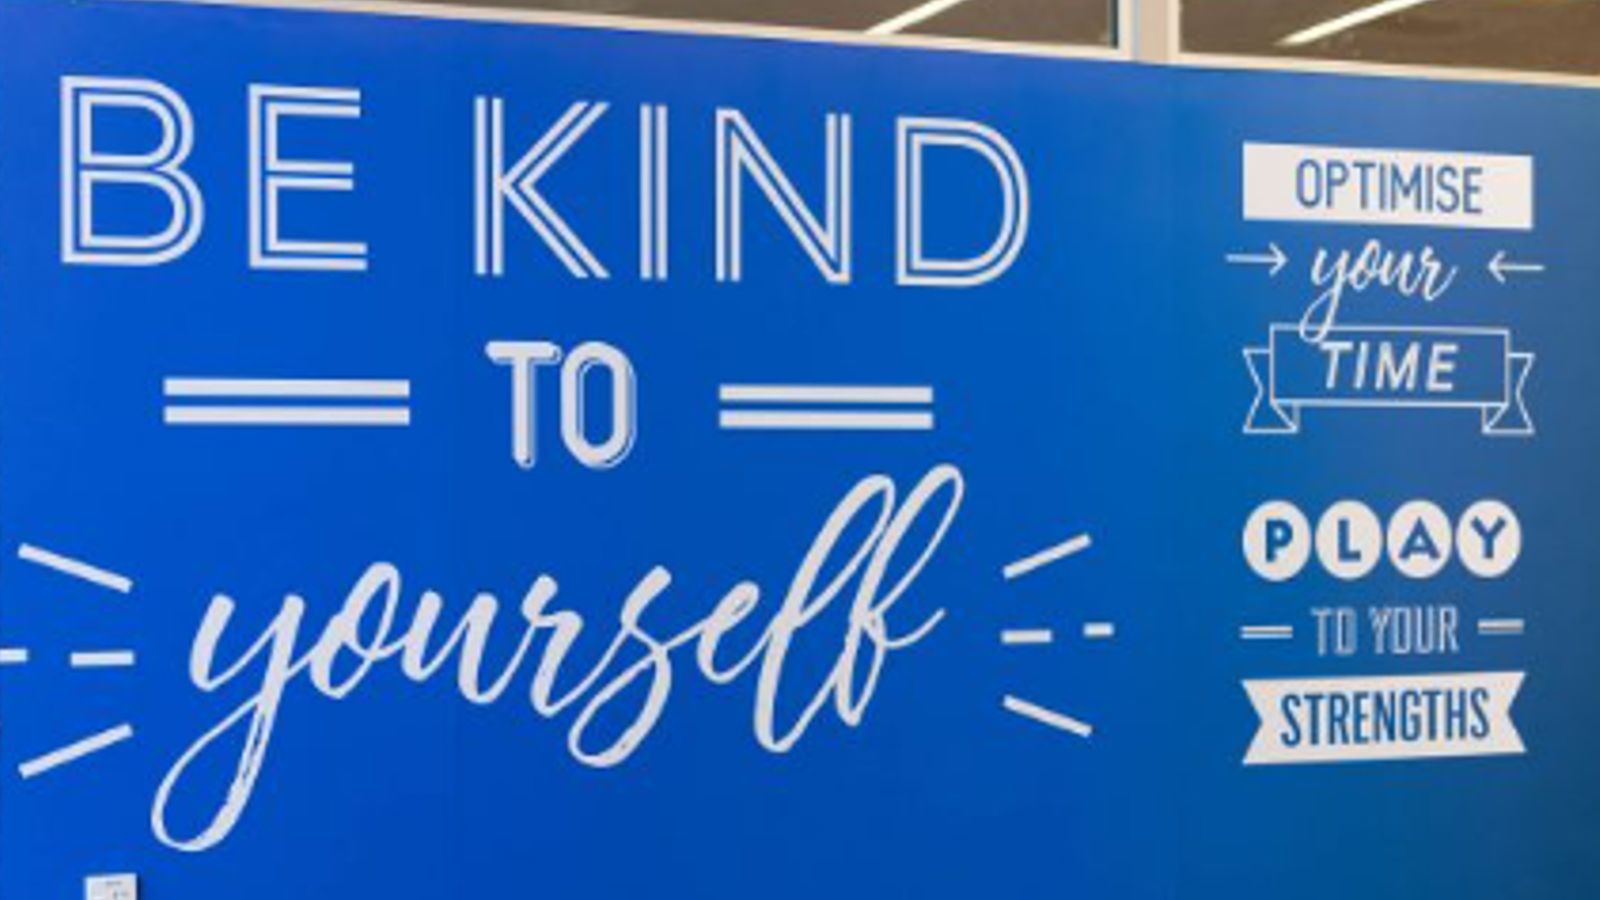 Image of text about being kind to yourself